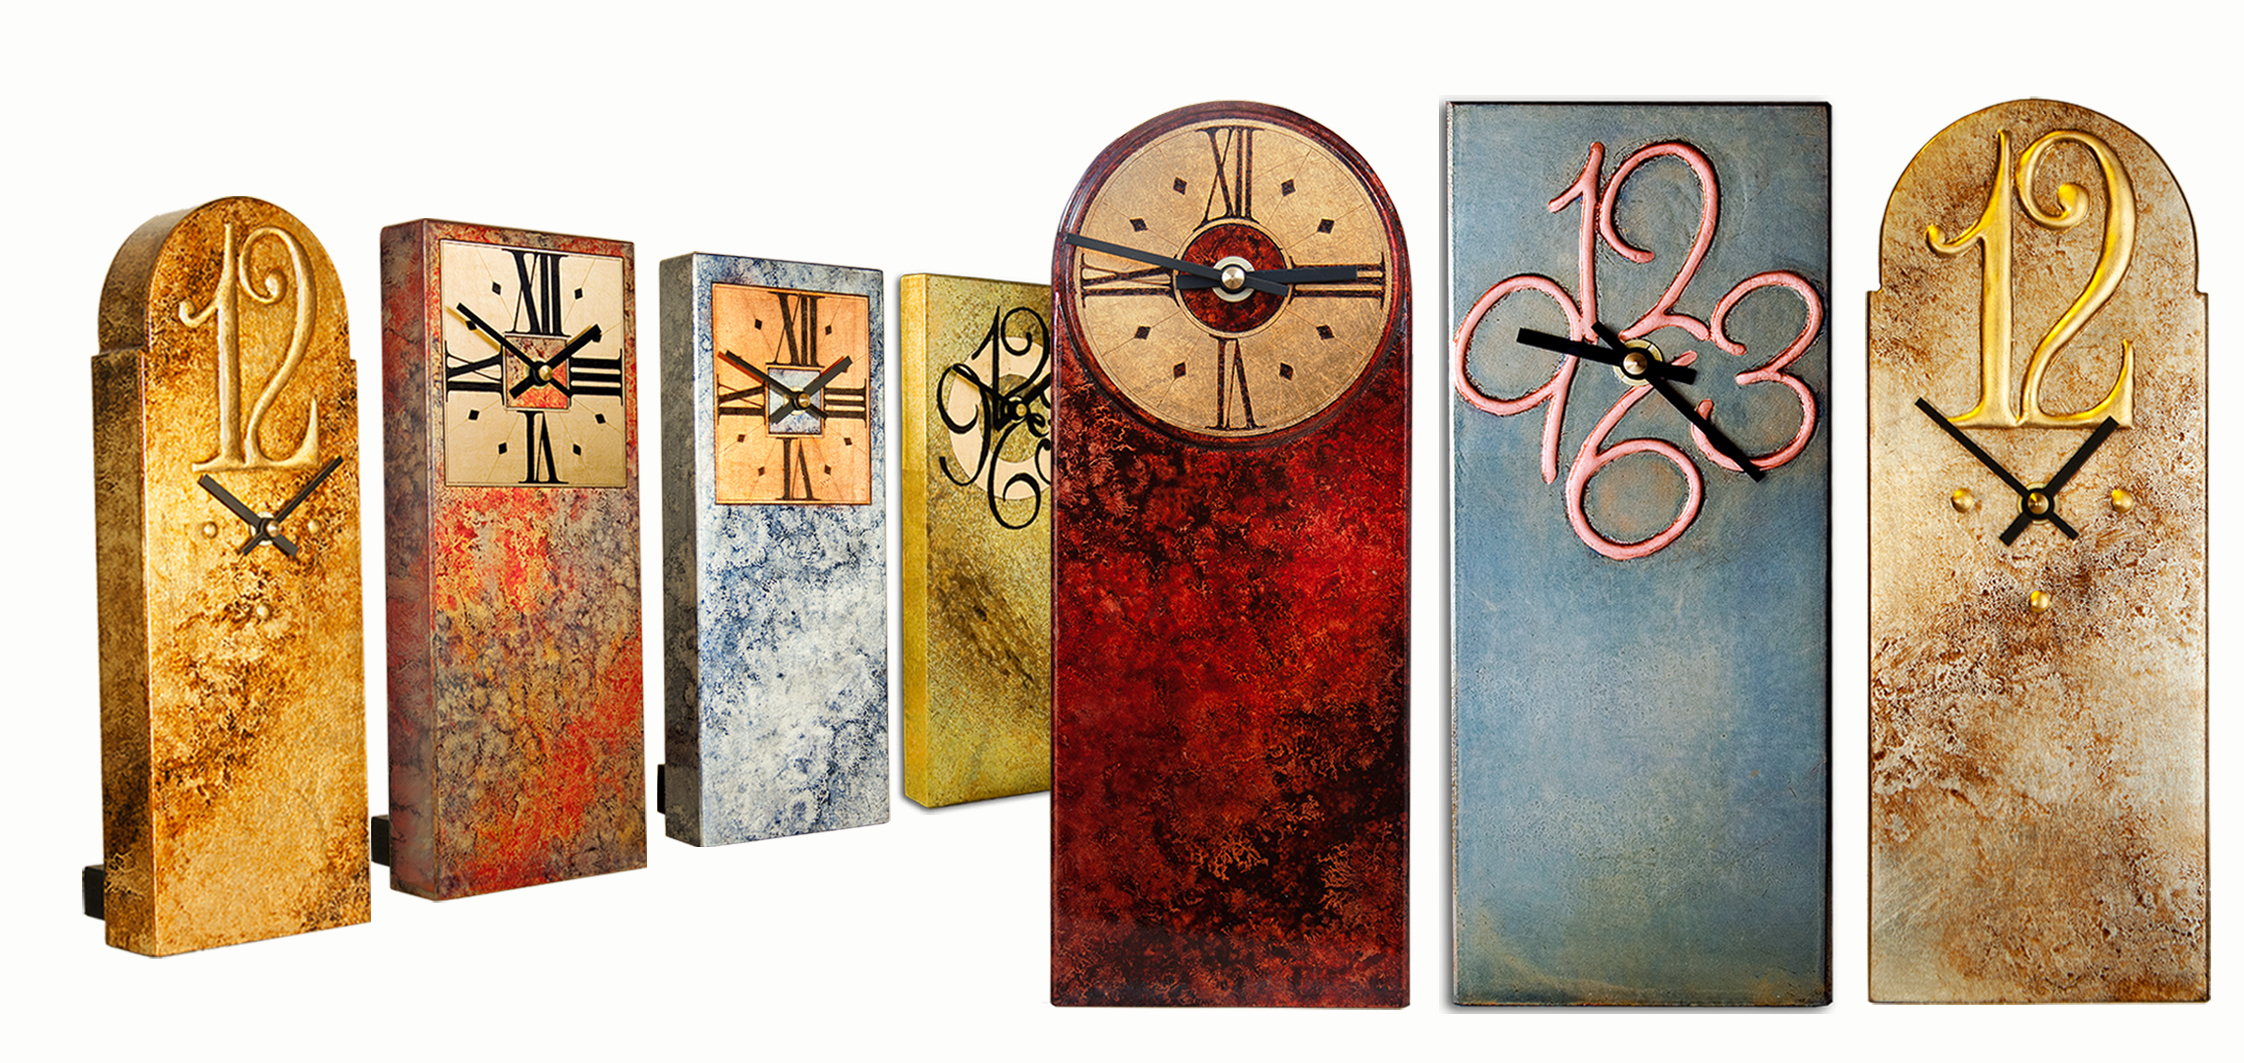 A stunning selection of my mantel clocks in their unique finishes